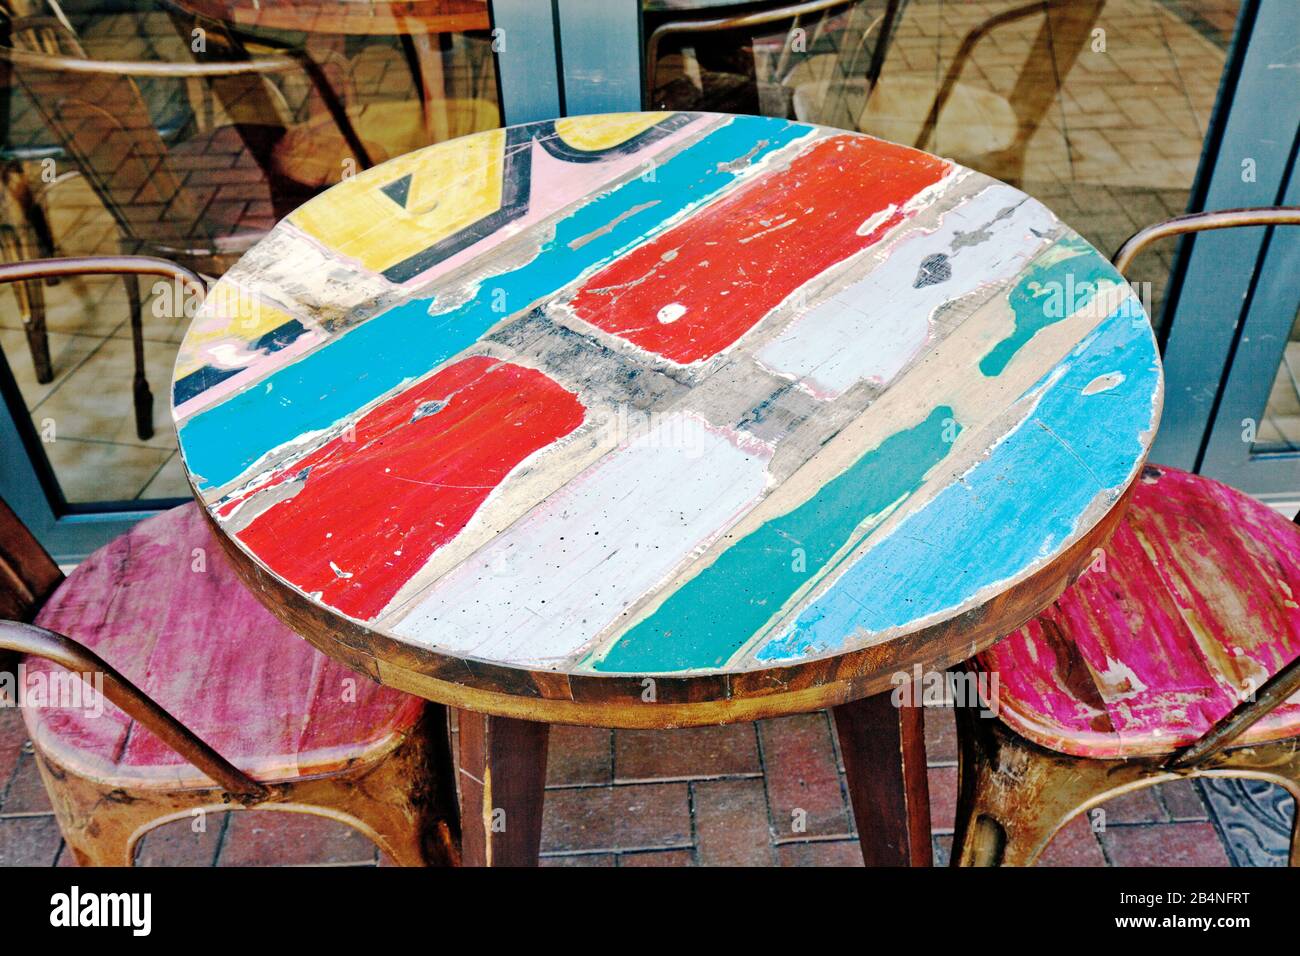 Round, colorfully painted table with chairs. Cabourg is a seaside resort in the French region of Normandy in the Calvados department. Stock Photo